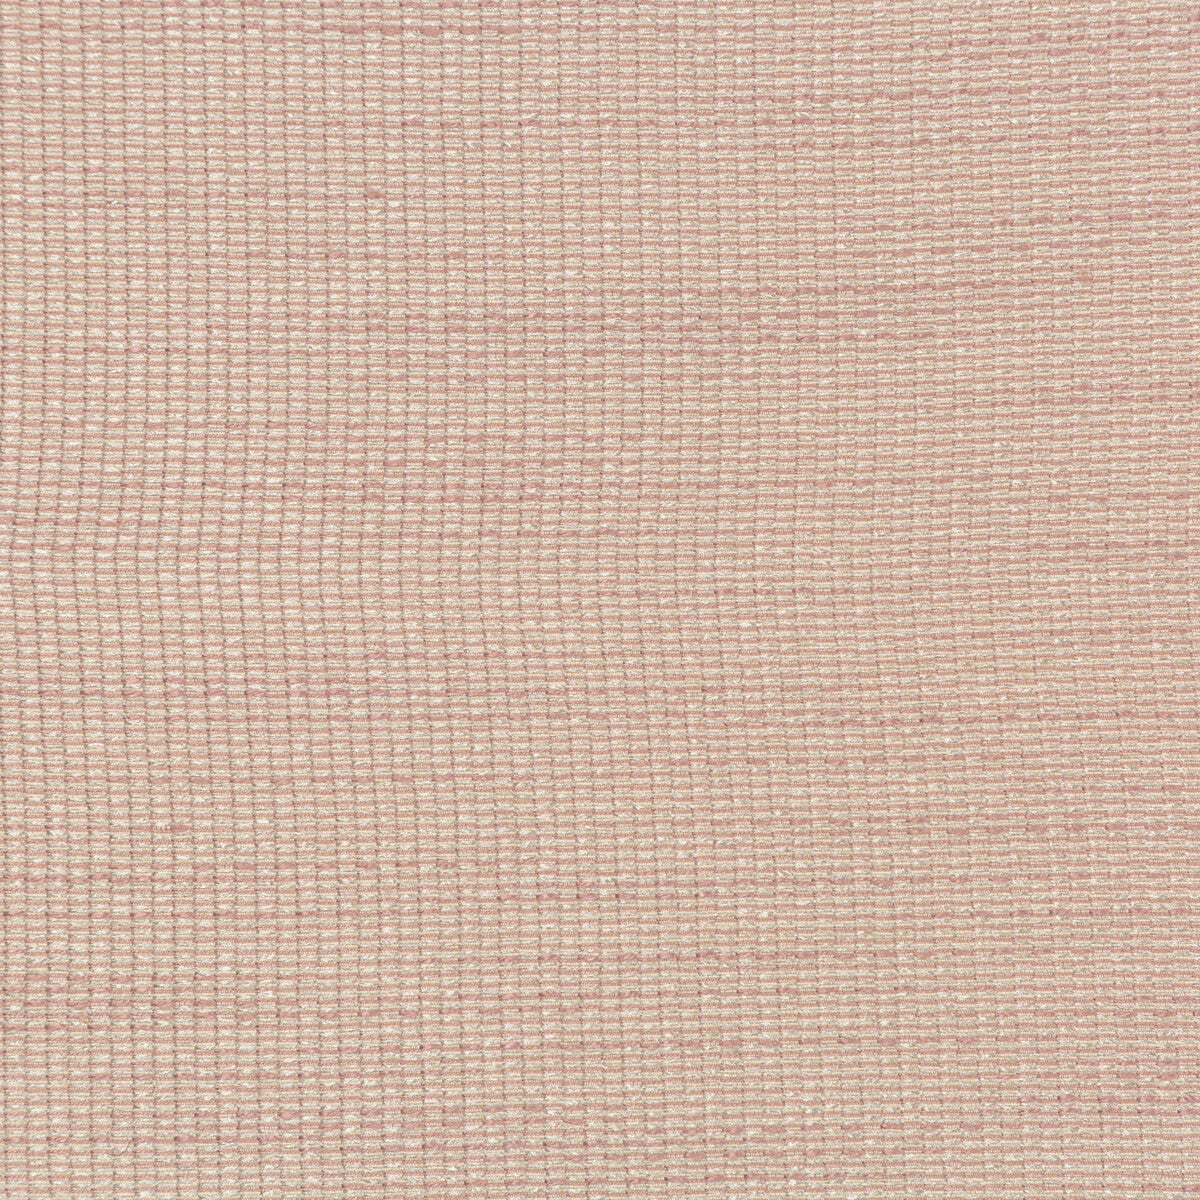 Hadley fabric in rosewood color - pattern 4652.10.0 - by Kravet Contract